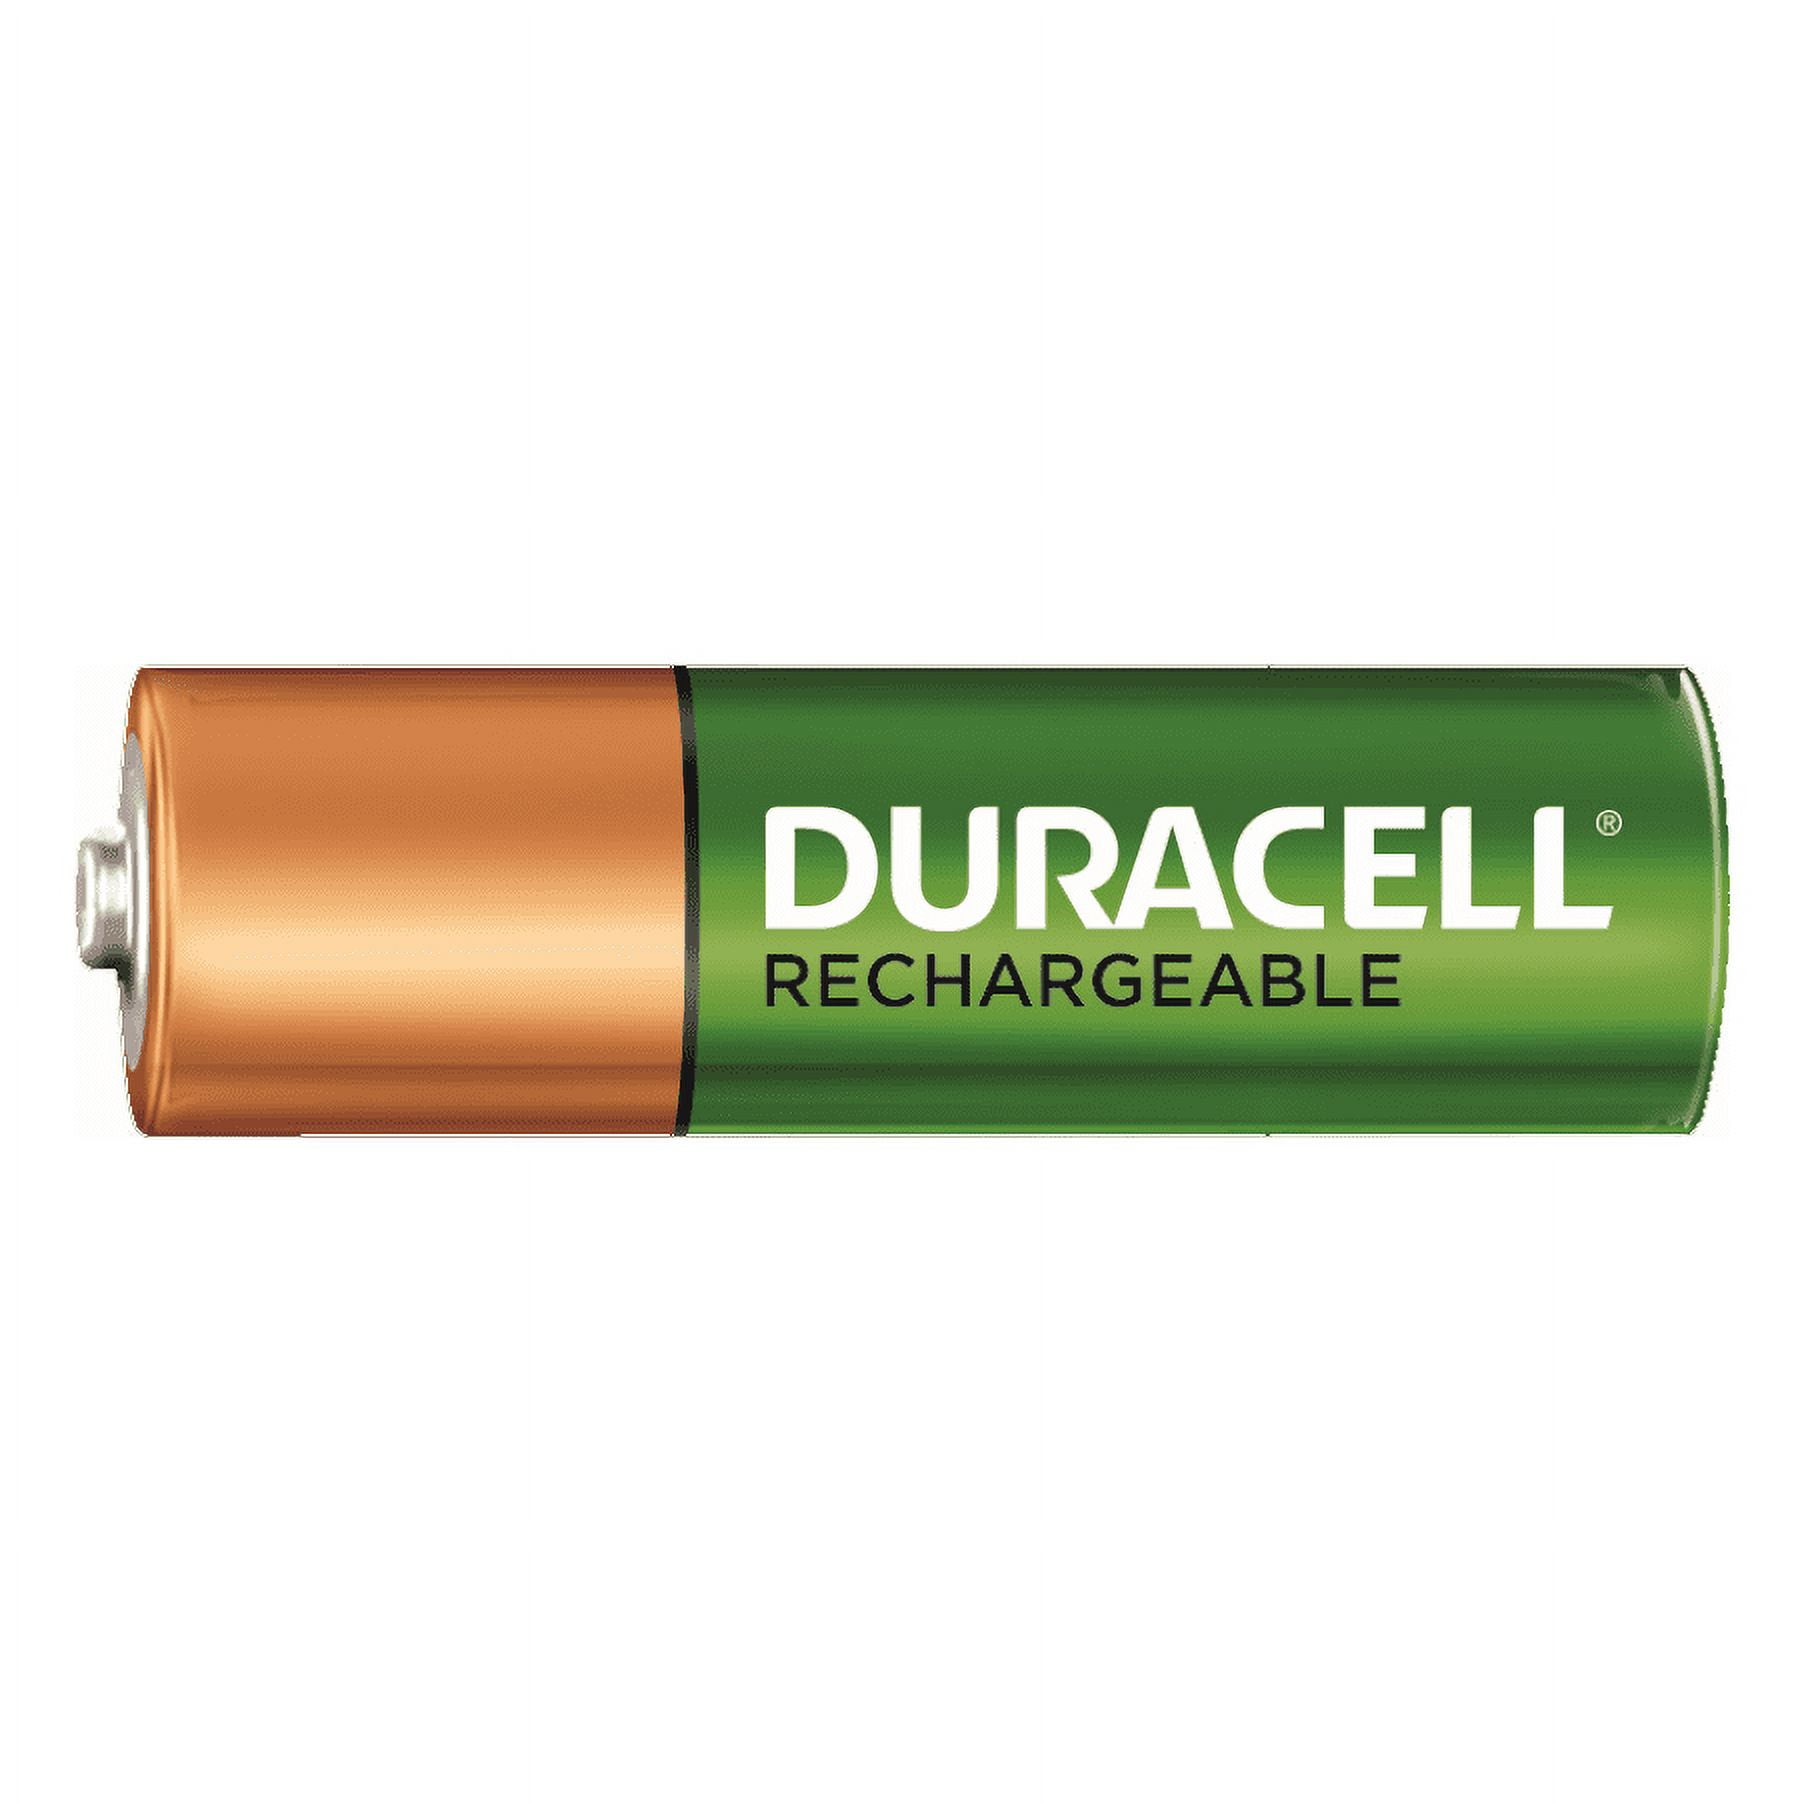 Duracell Rechargeable AA Batteries - 10 Pack 2500mAh NiMH-DX